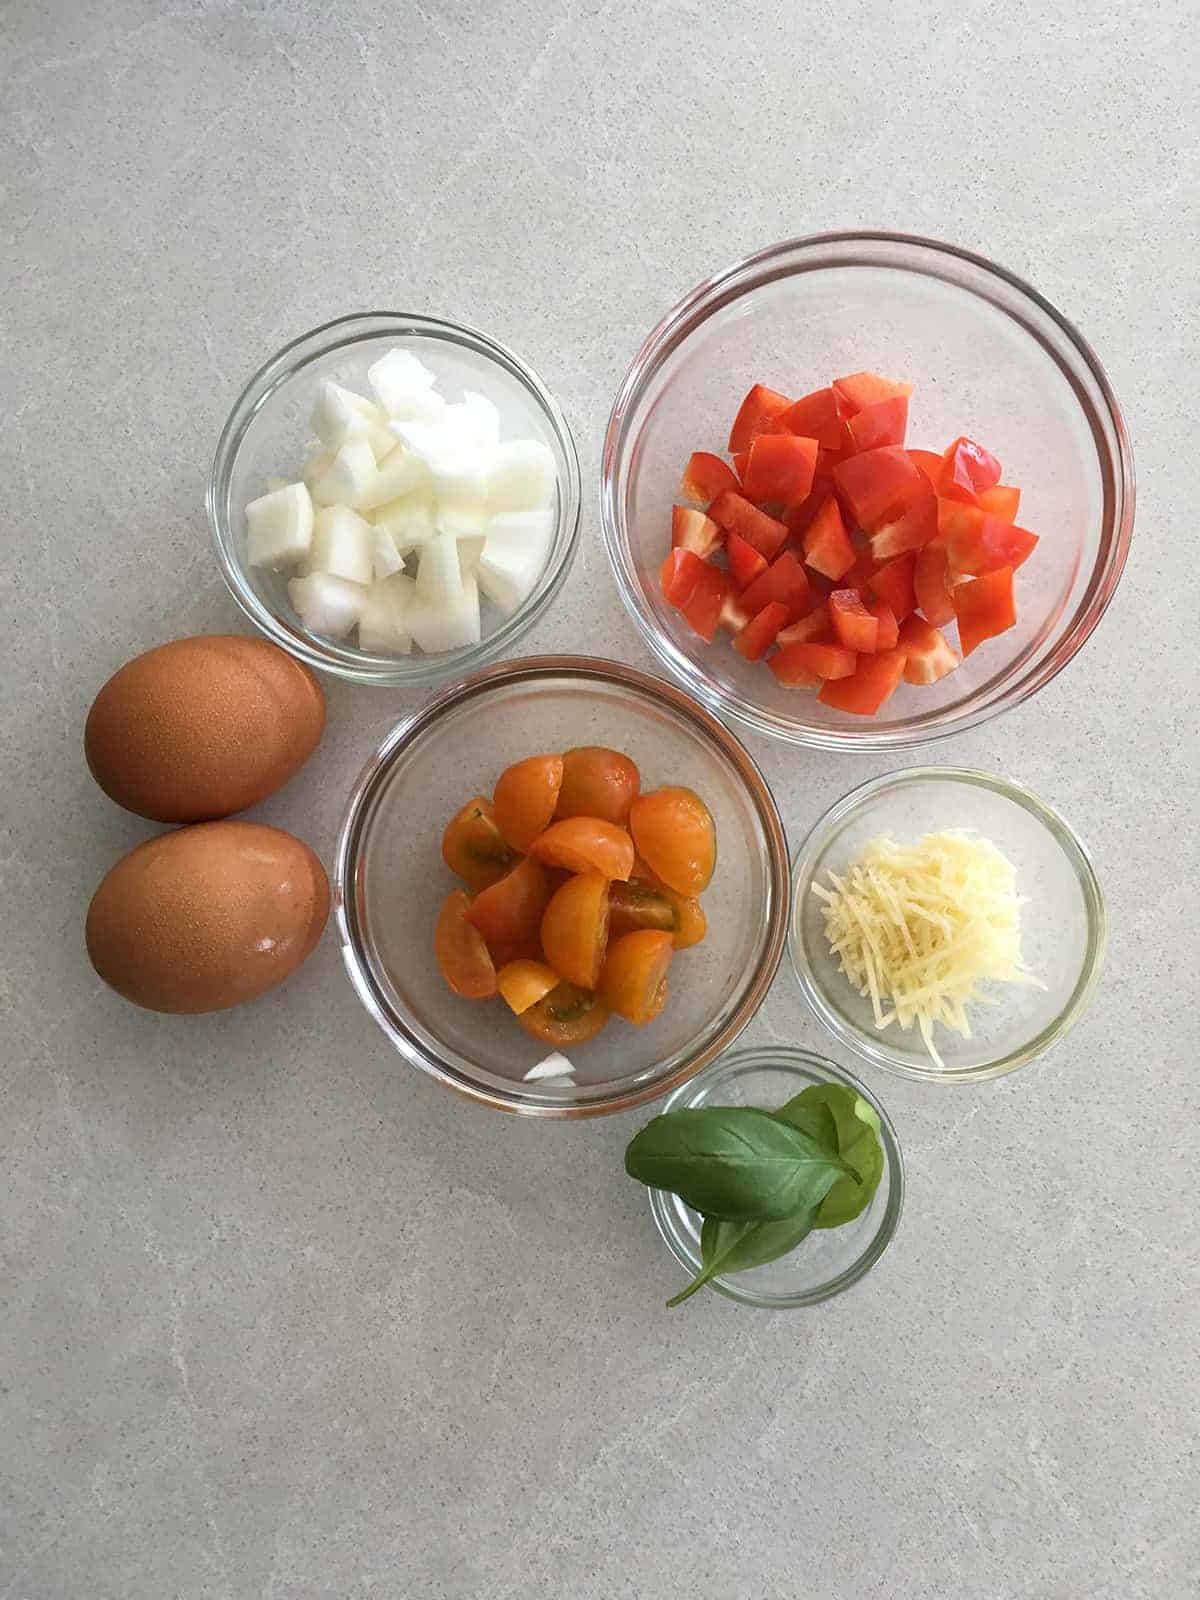 Two whole brown eggs alongside small glass food prep bowls containing chopped onions, red peppers, cherry tomatoes, shredded Parmesan cheese and fresh basil leaves